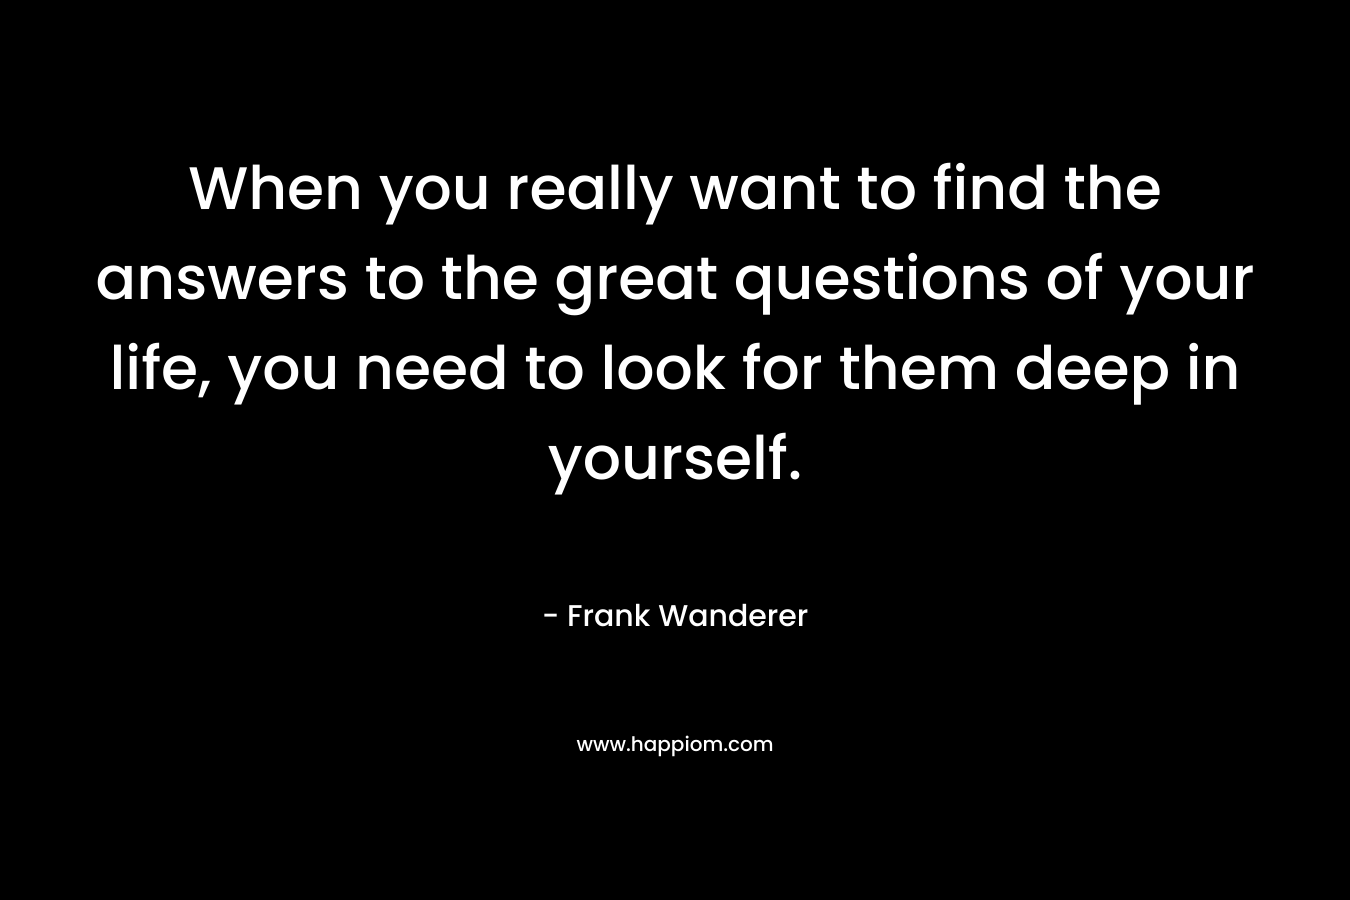 When you really want to find the answers to the great questions of your life, you need to look for them deep in yourself. – Frank Wanderer